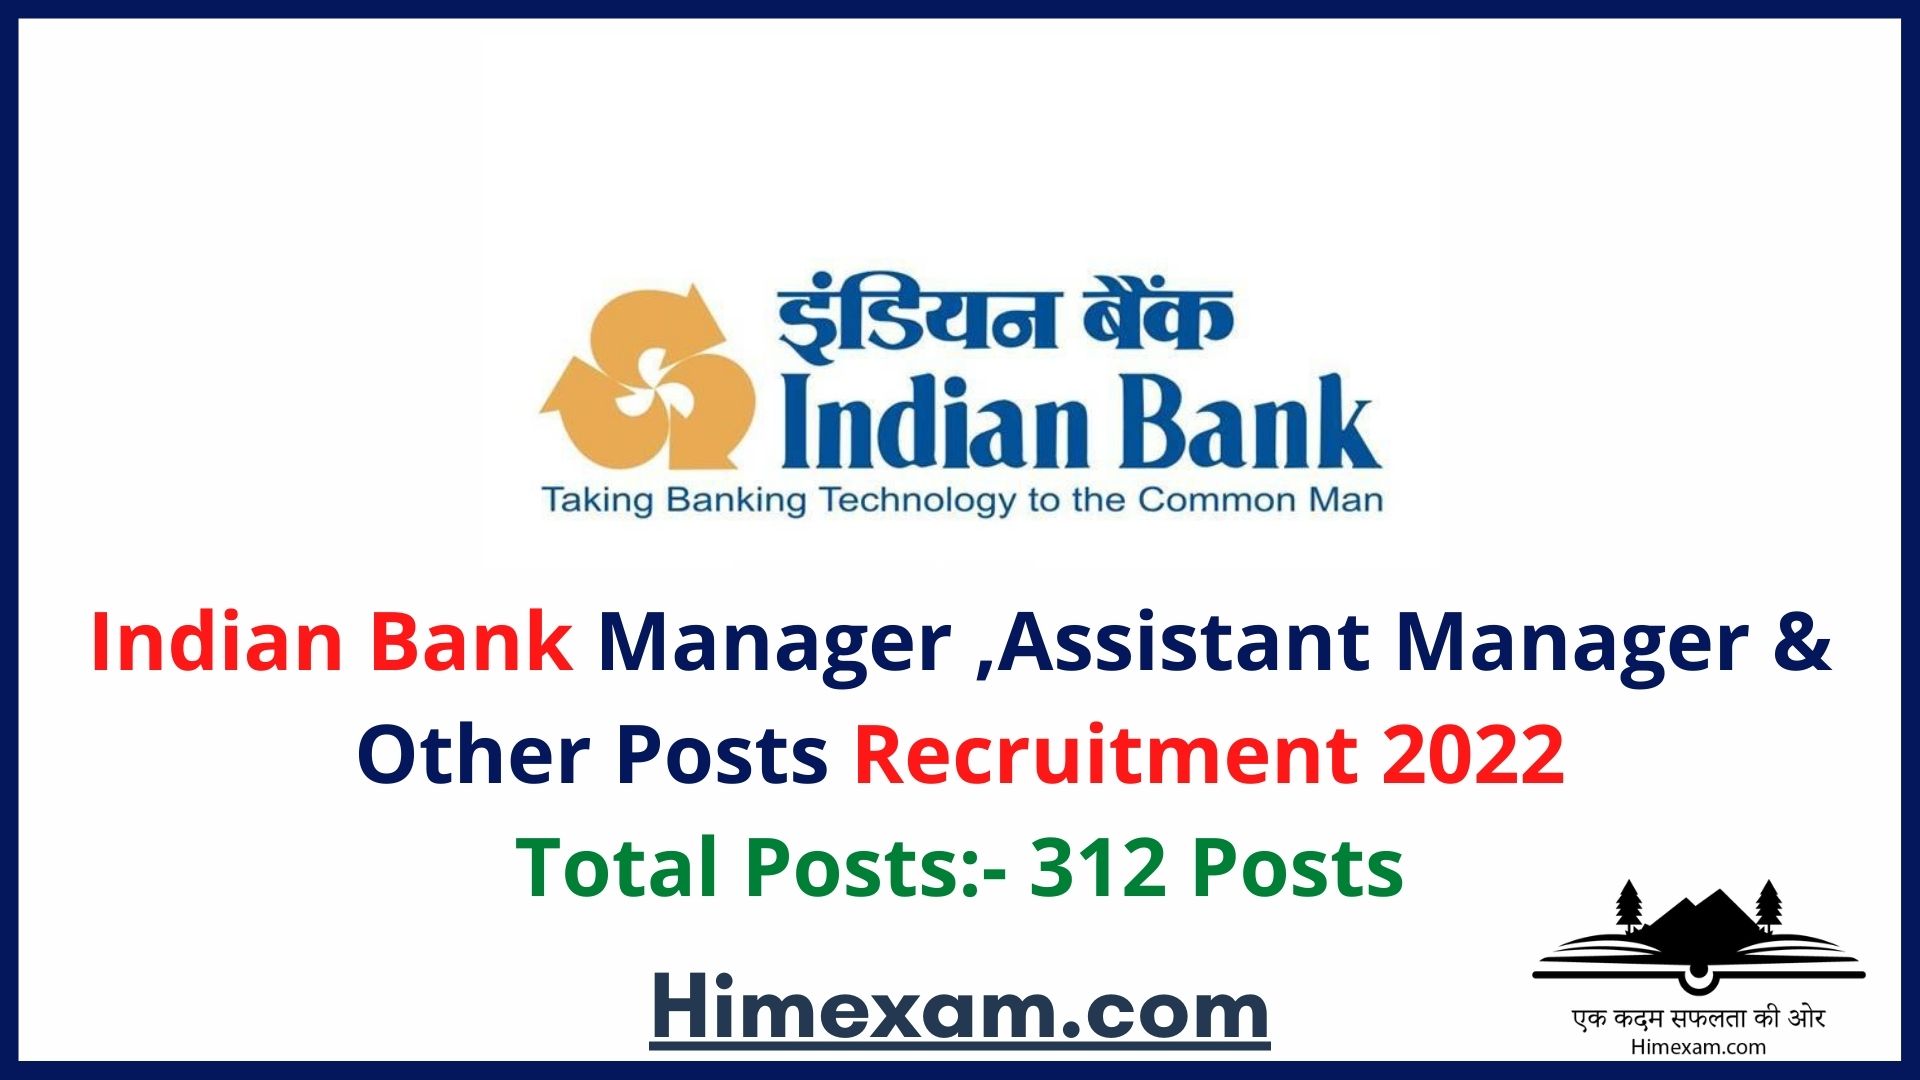 Indian Bank Manager ,Assistant Manager & Other Posts Recruitment 2022